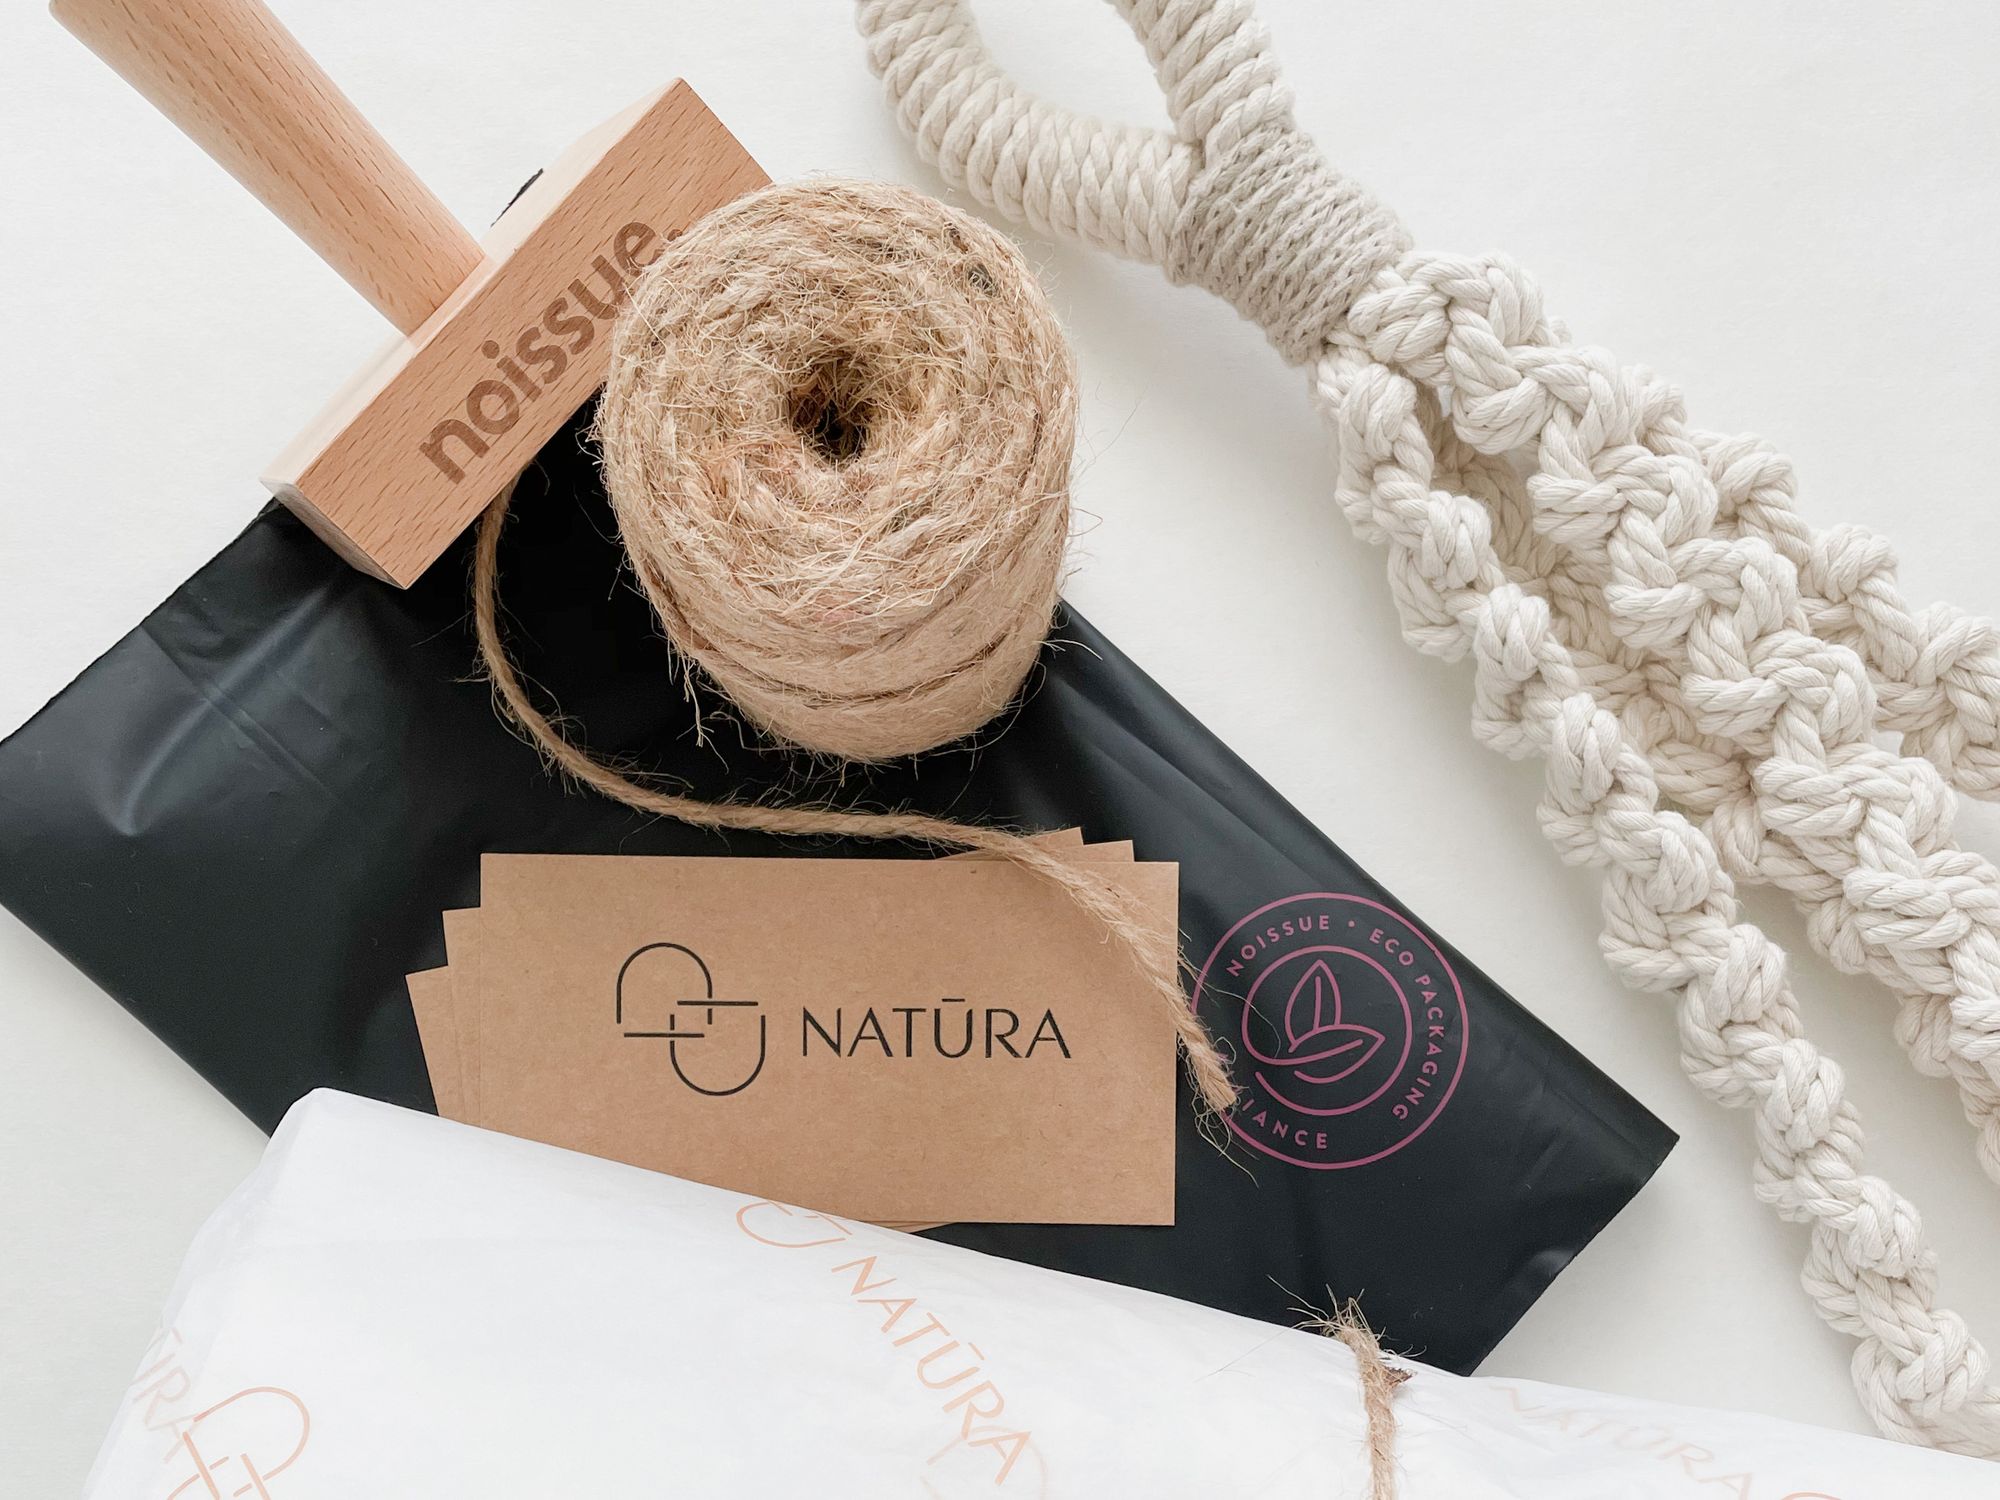 Natūra: Decorative Pieces Committed to the Well-being of the Planet